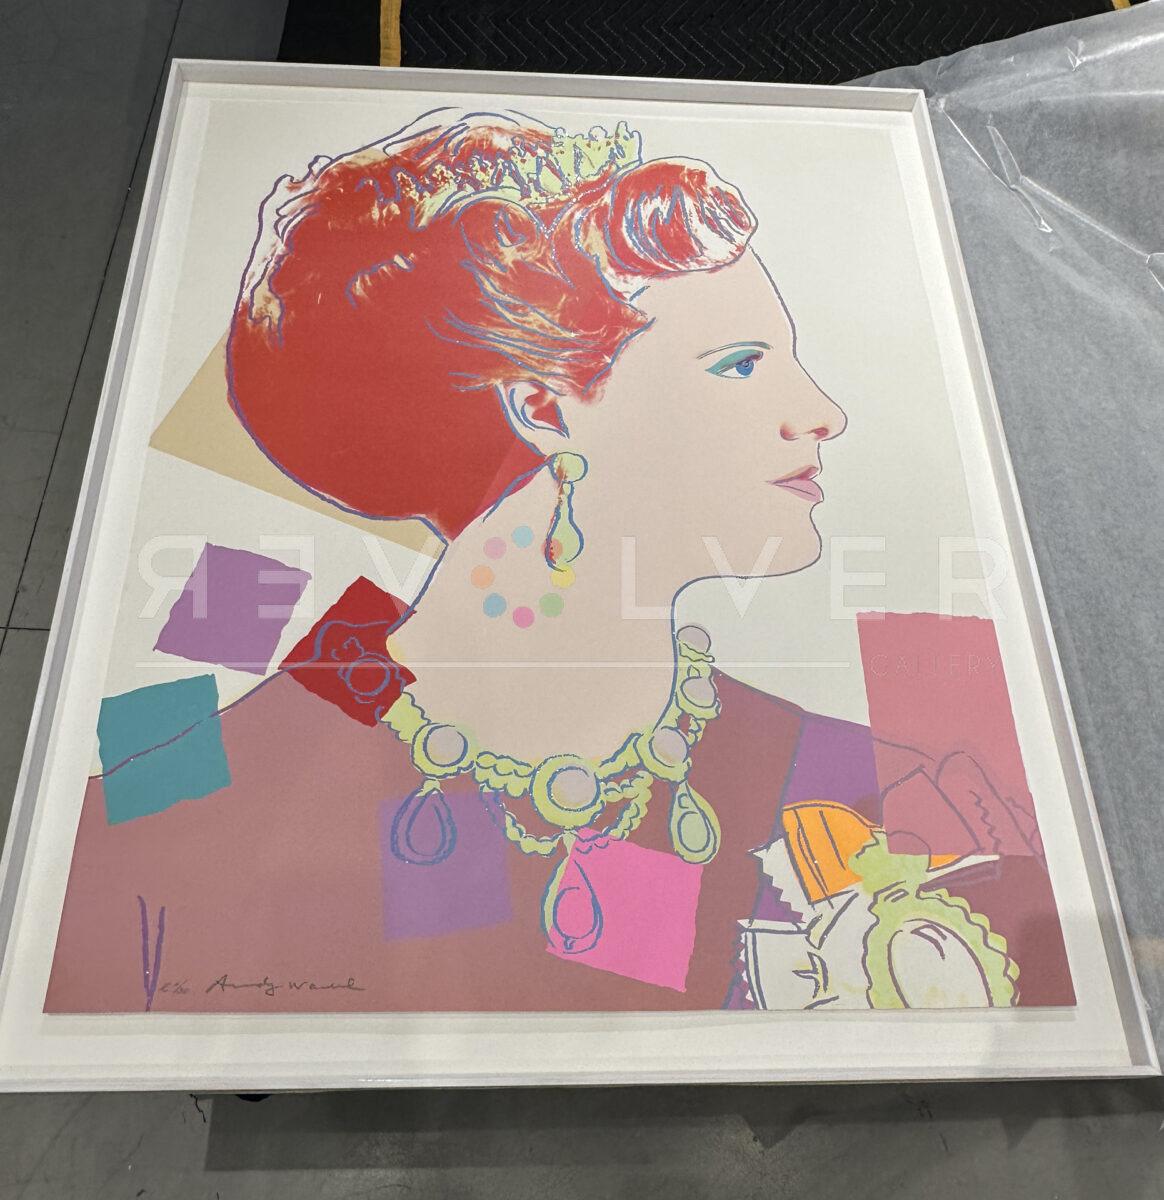 Queen Margrethe 344 (Royal Edition) by Andy Warhol out of a frame